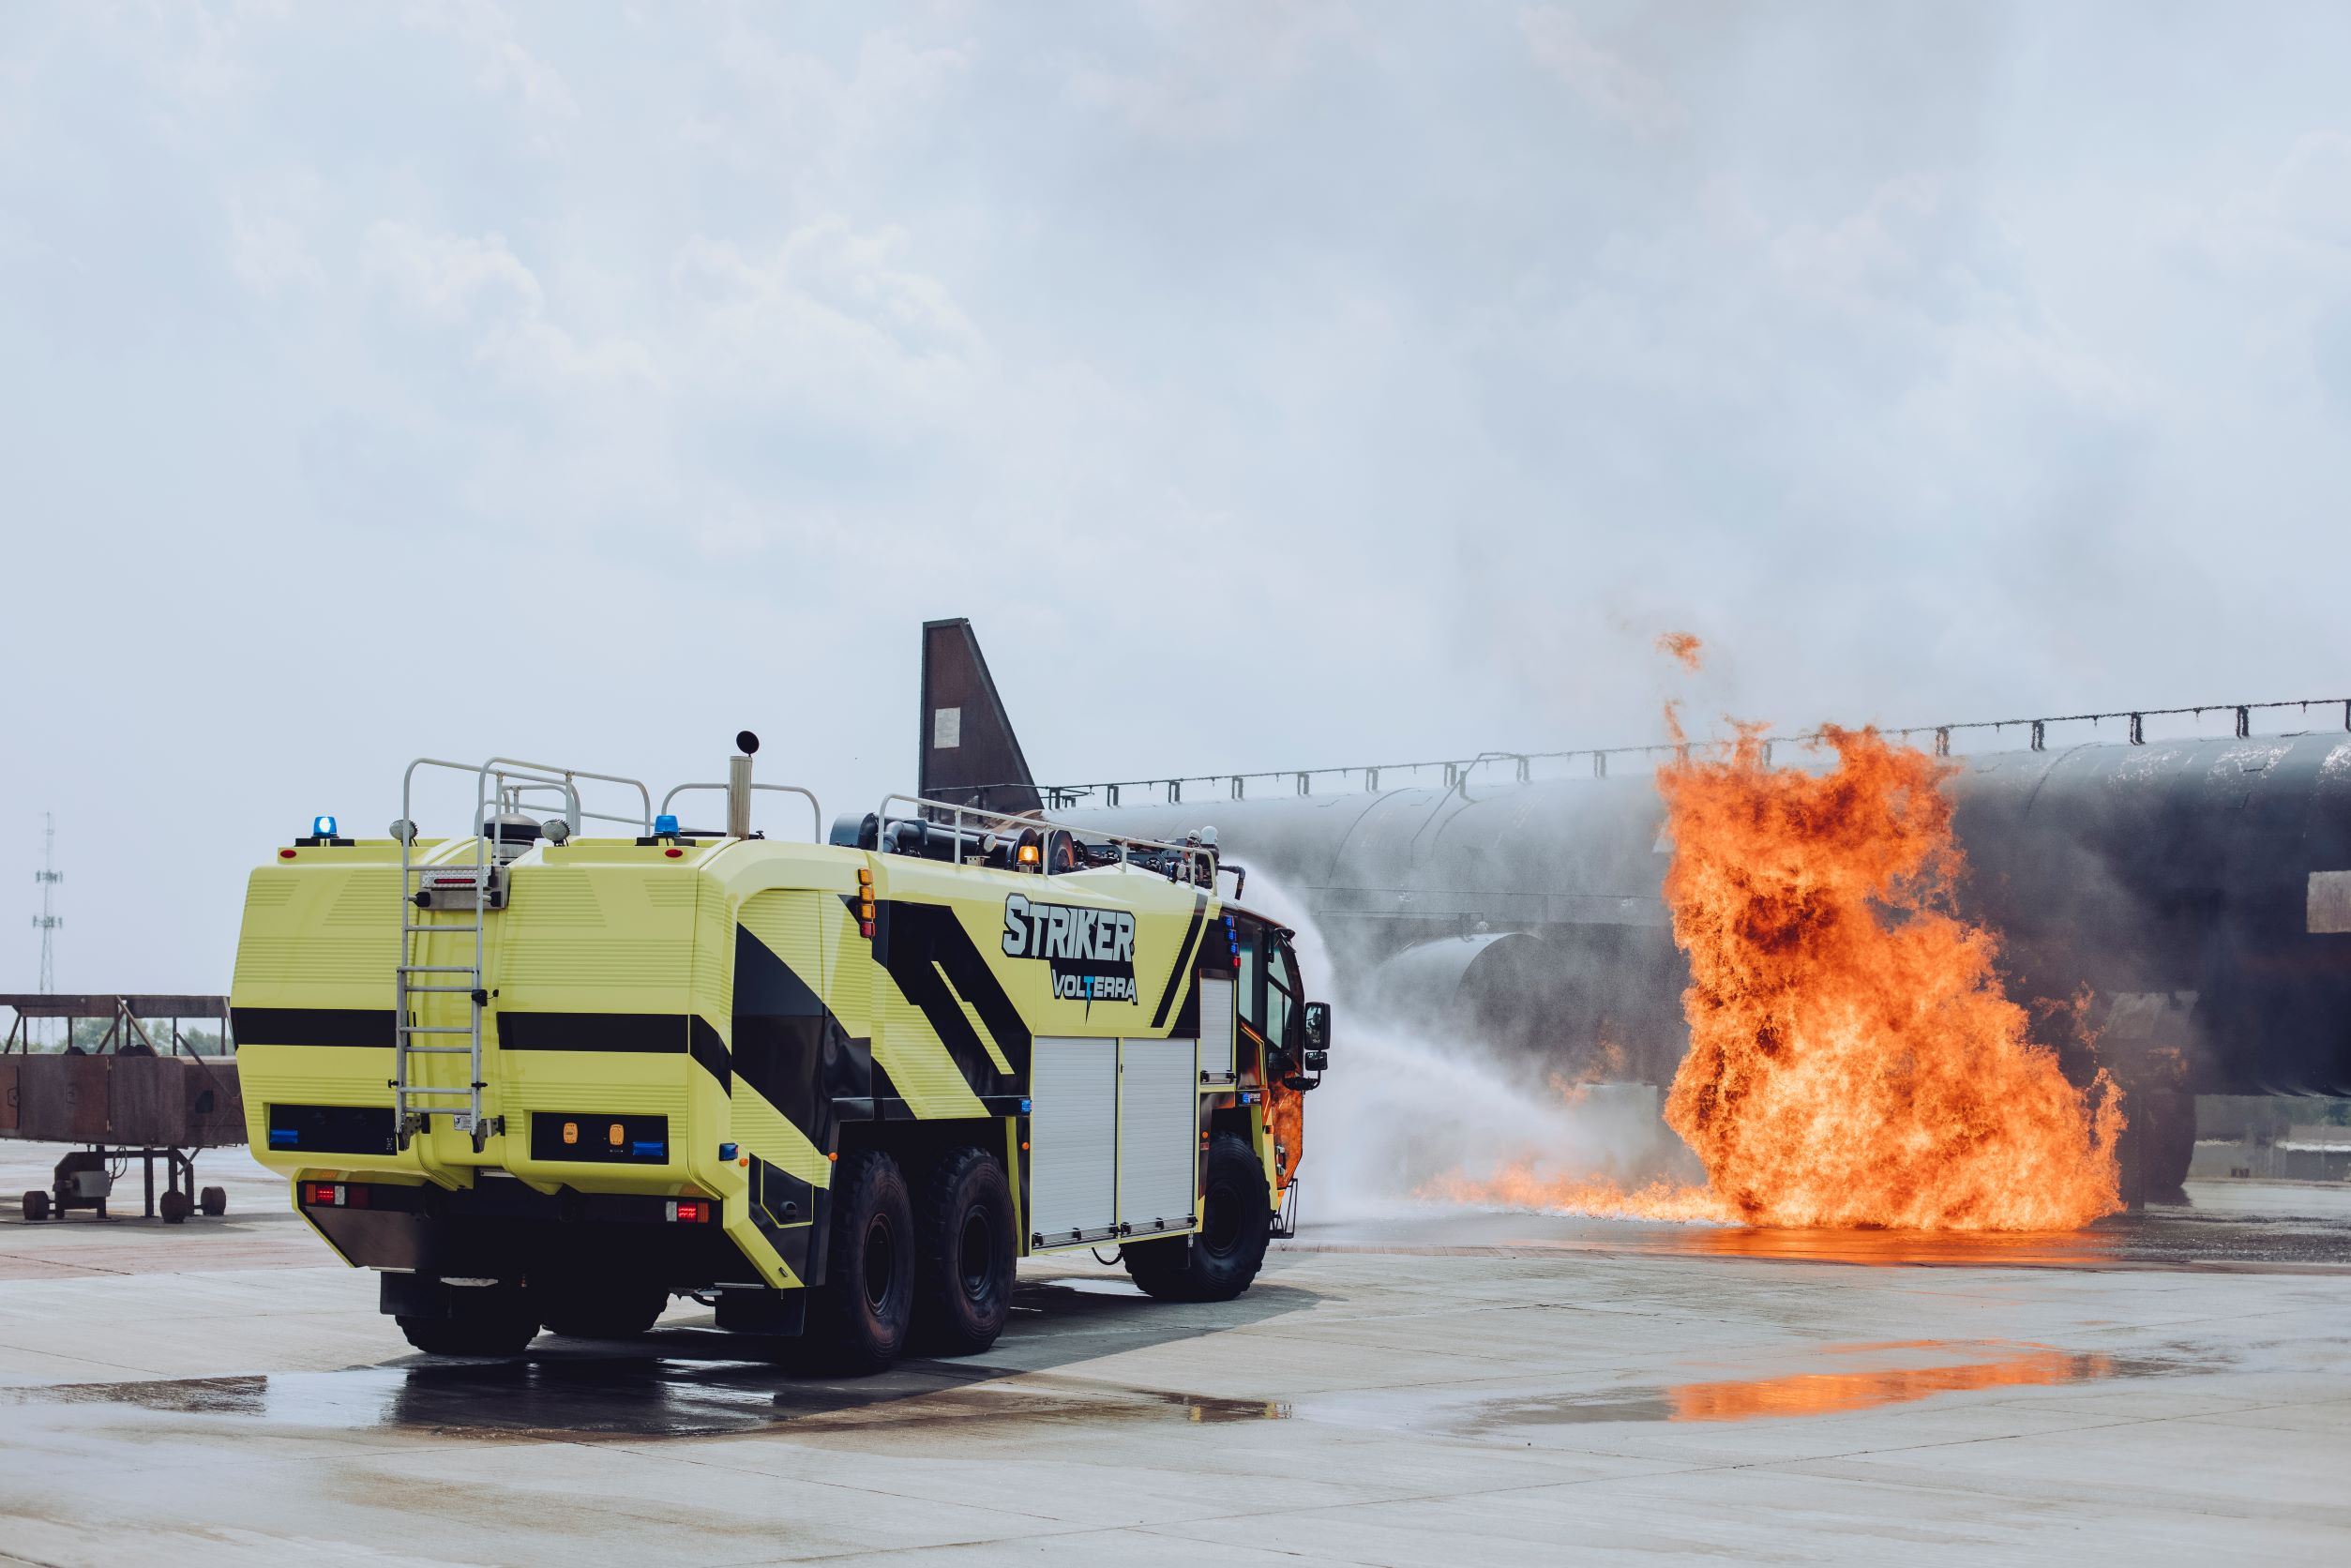 Striker Volterra putting out a fire on the runway.